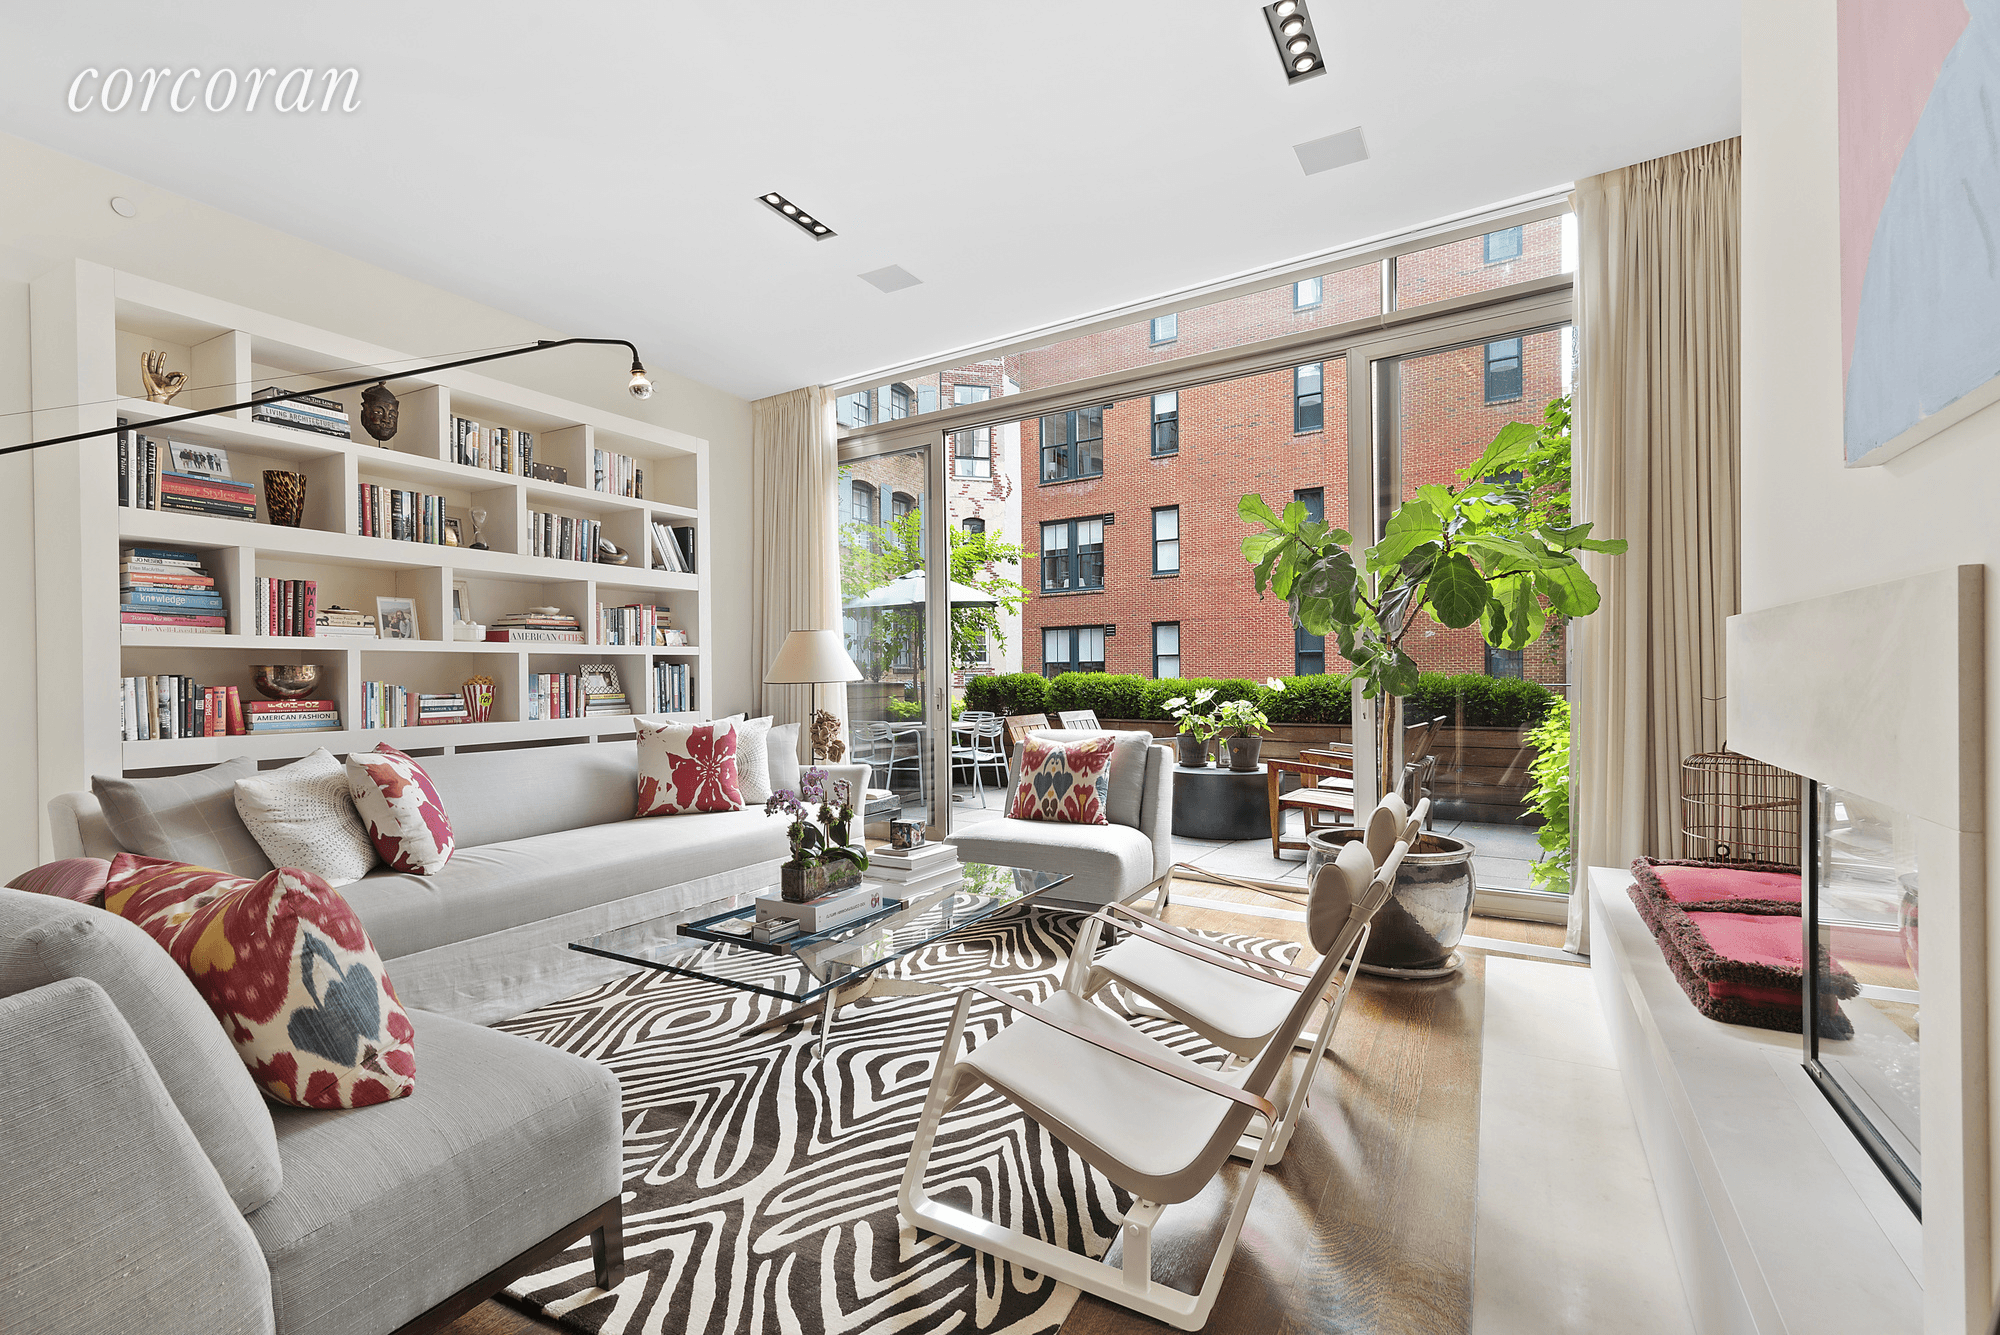 Flanked by private terraces, this sun kissed convertible 4 bedroom, 3 bathroom residence offers exceptional indoor outdoor living in a coveted modern Tribeca condominium.